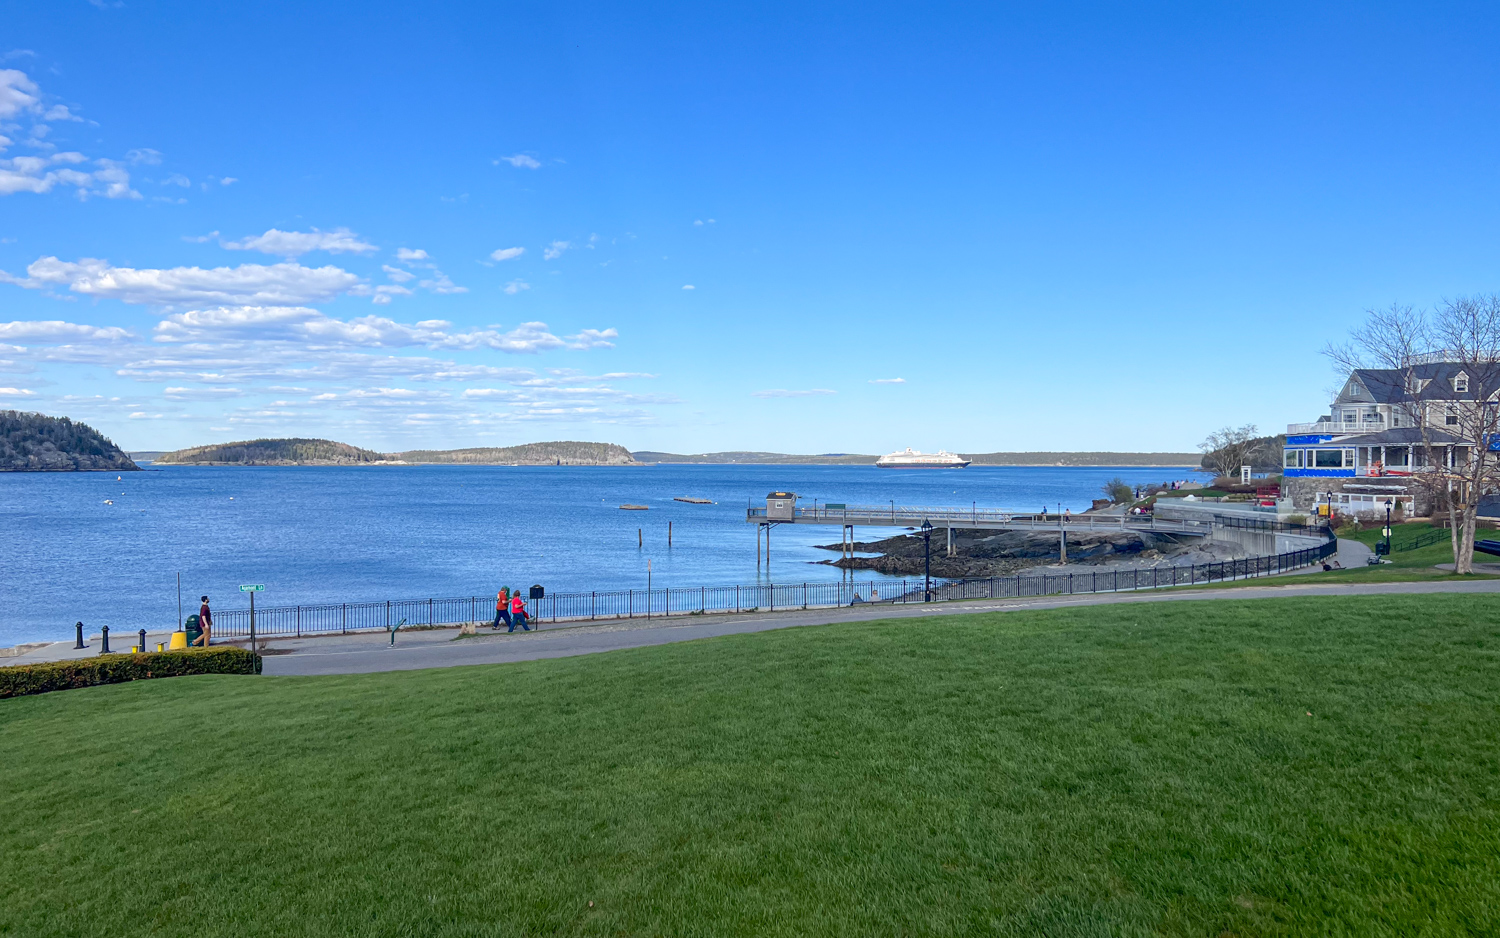 Picnicking in Agamont Park is one of the best things to do in Bar Harbor, Maine